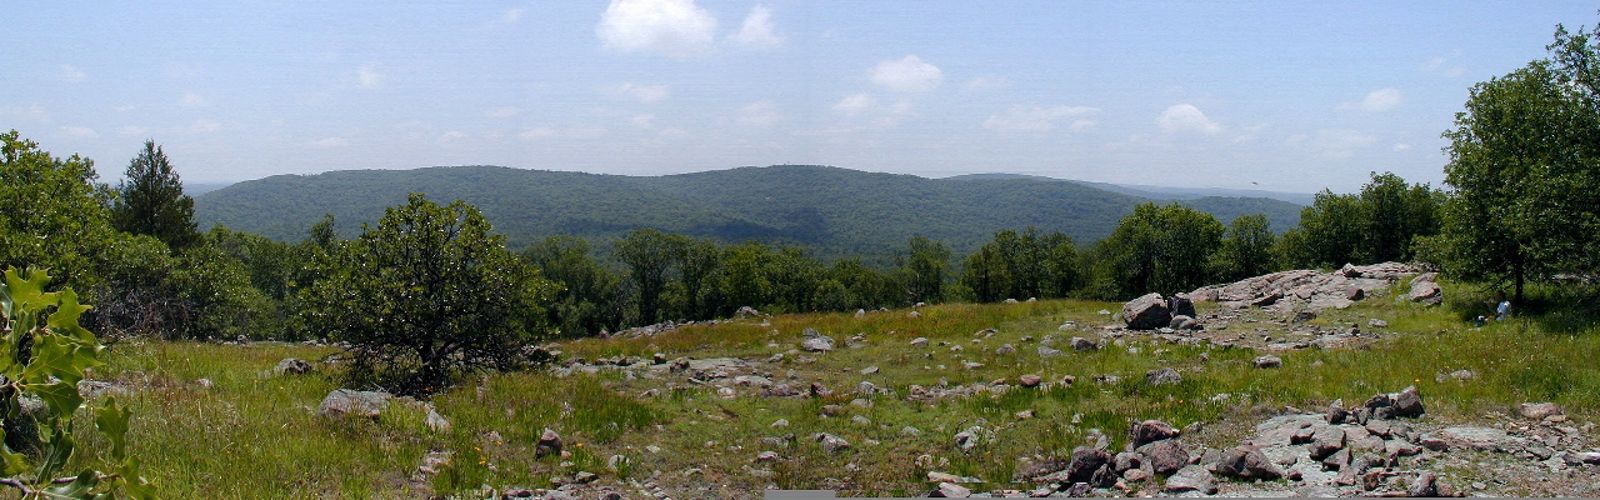 Panoramic view of a forested mountain landscape.